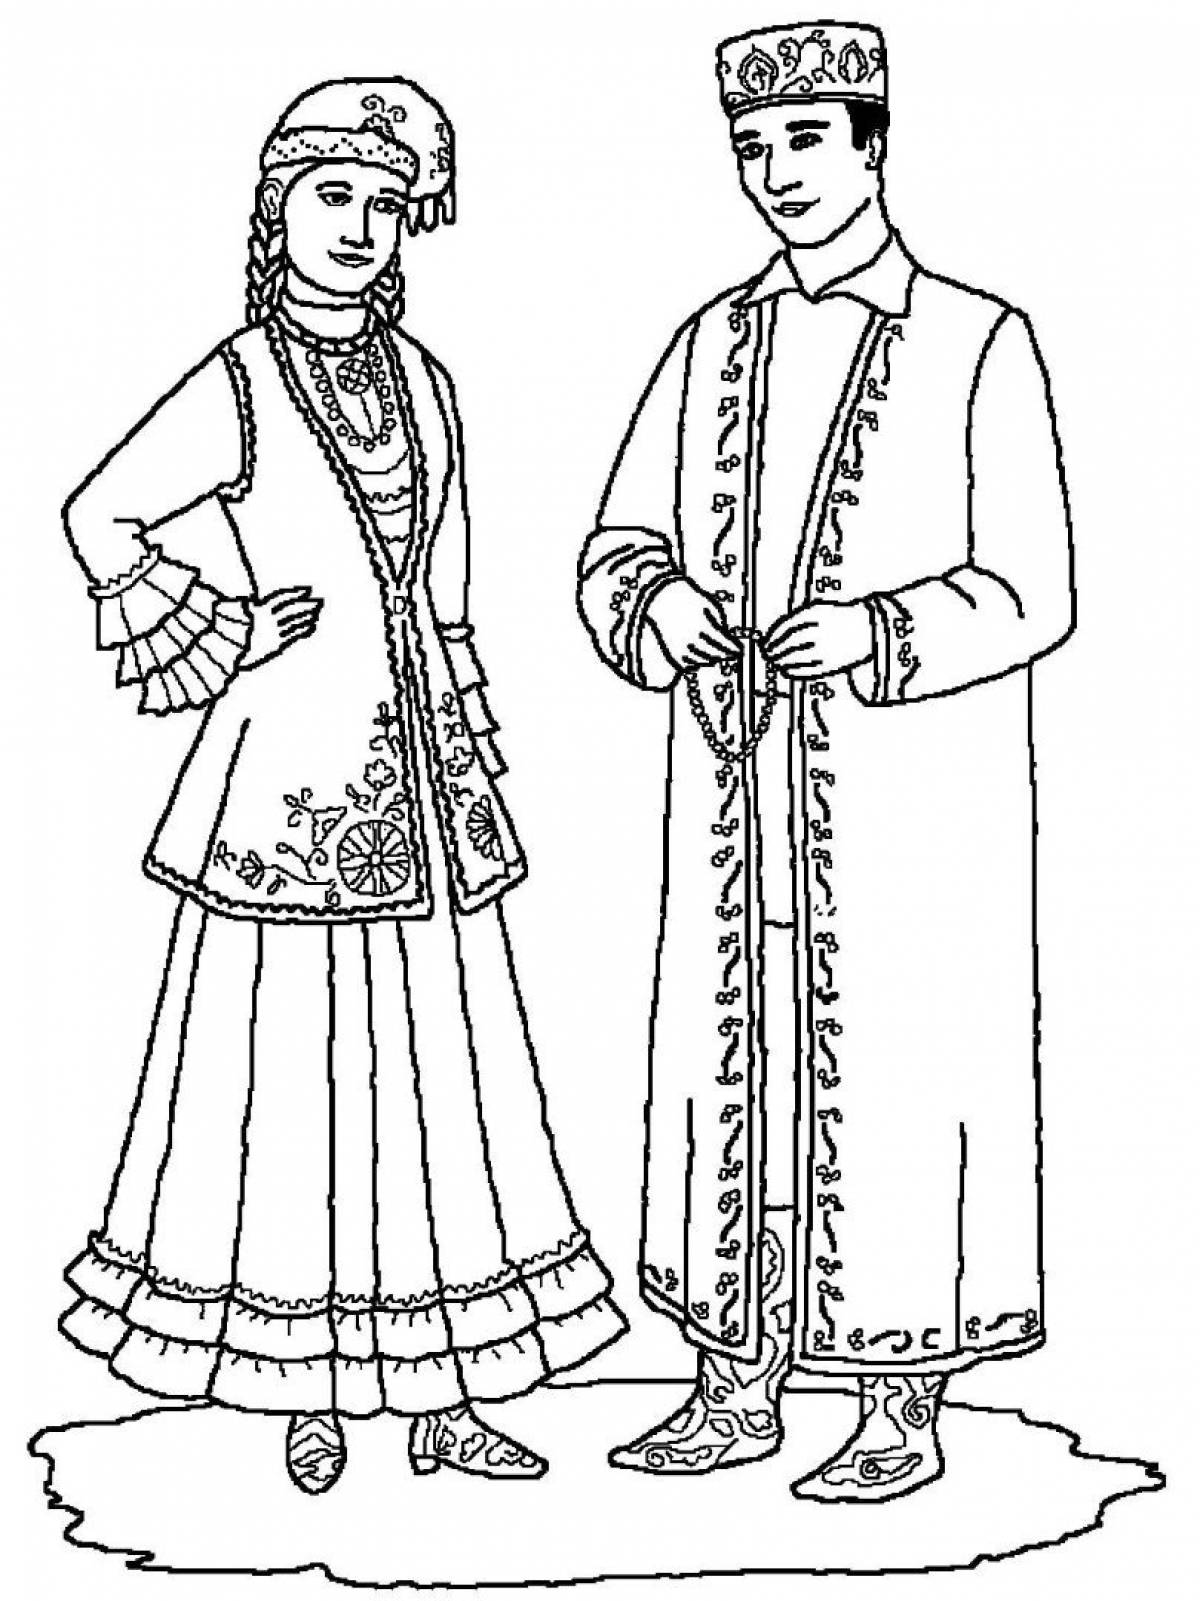 Coloring page charming Adyghe costume